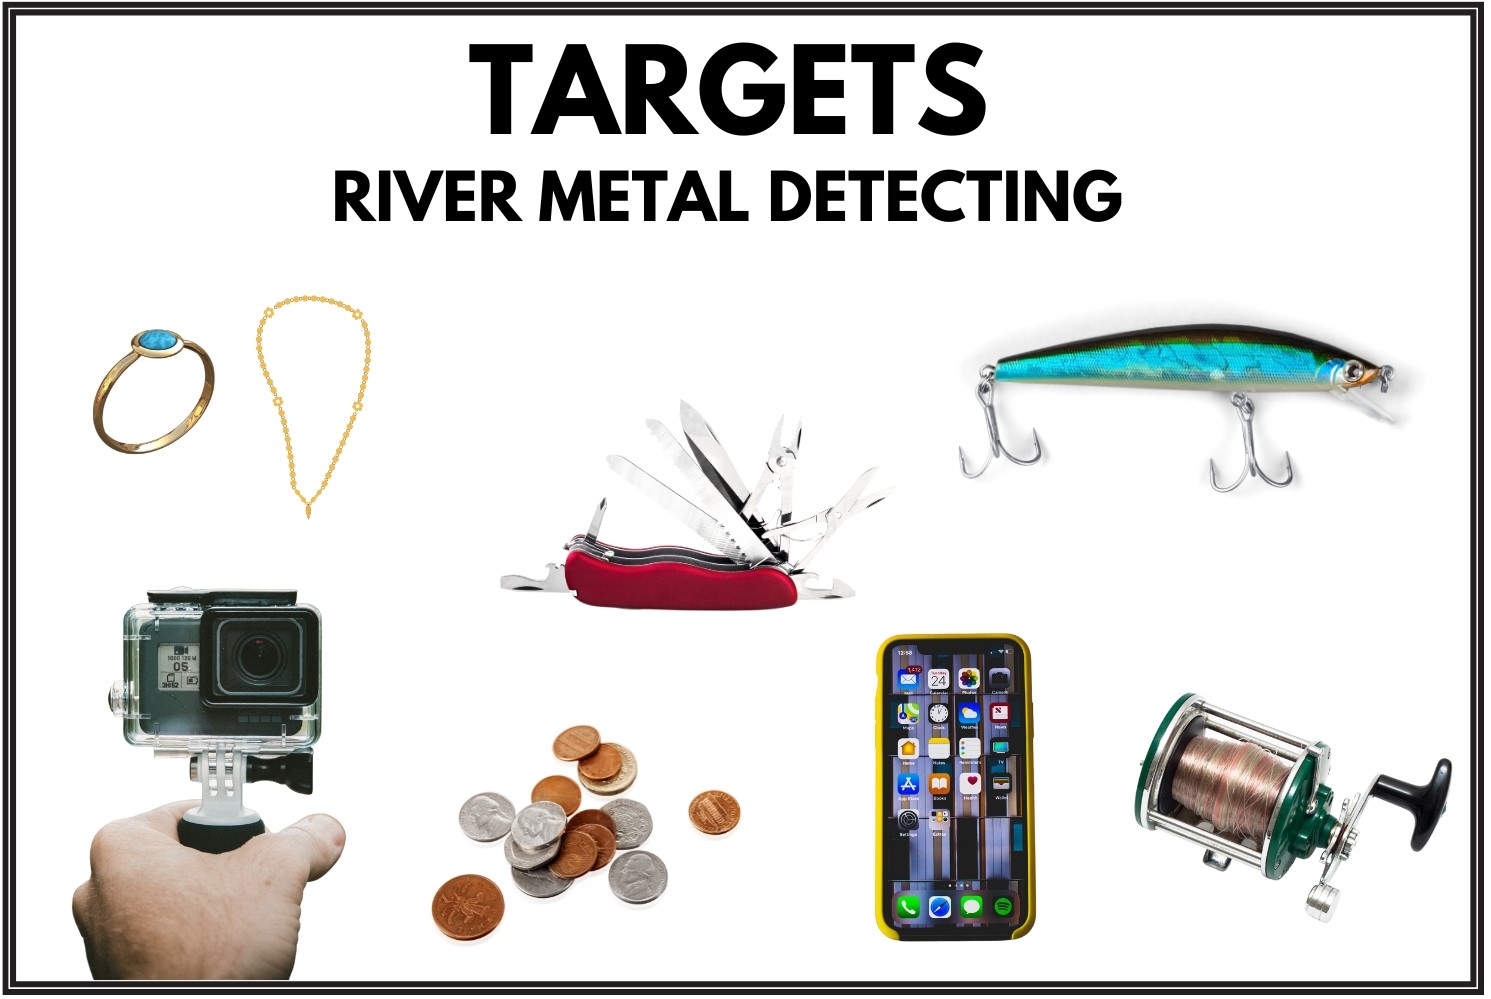 Targets that you can find with a metal detector in the river!